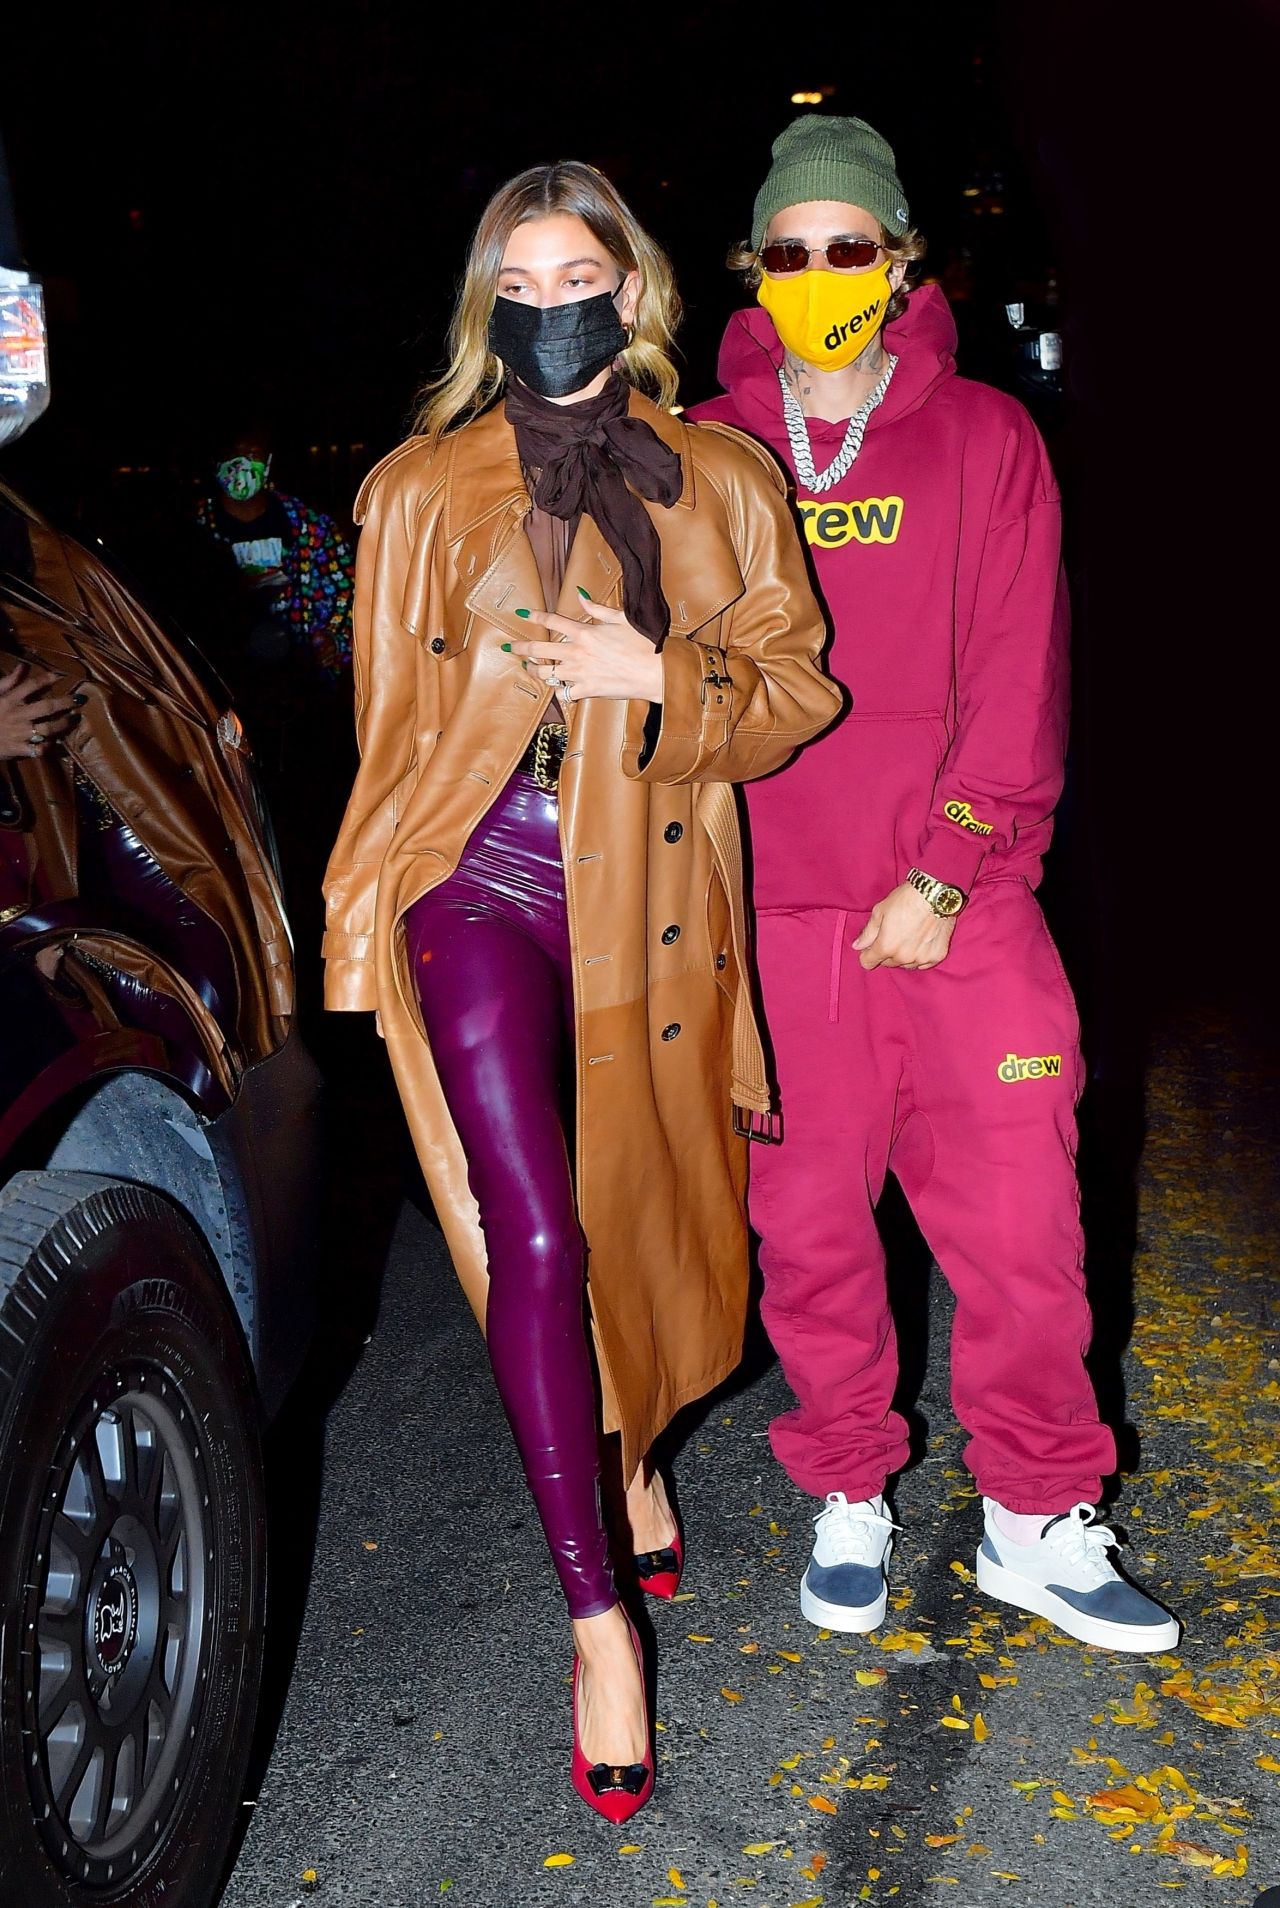 hailey-bieber-and-justin-bieber-night-out-new-york-city-10-15-2020-9.jpg